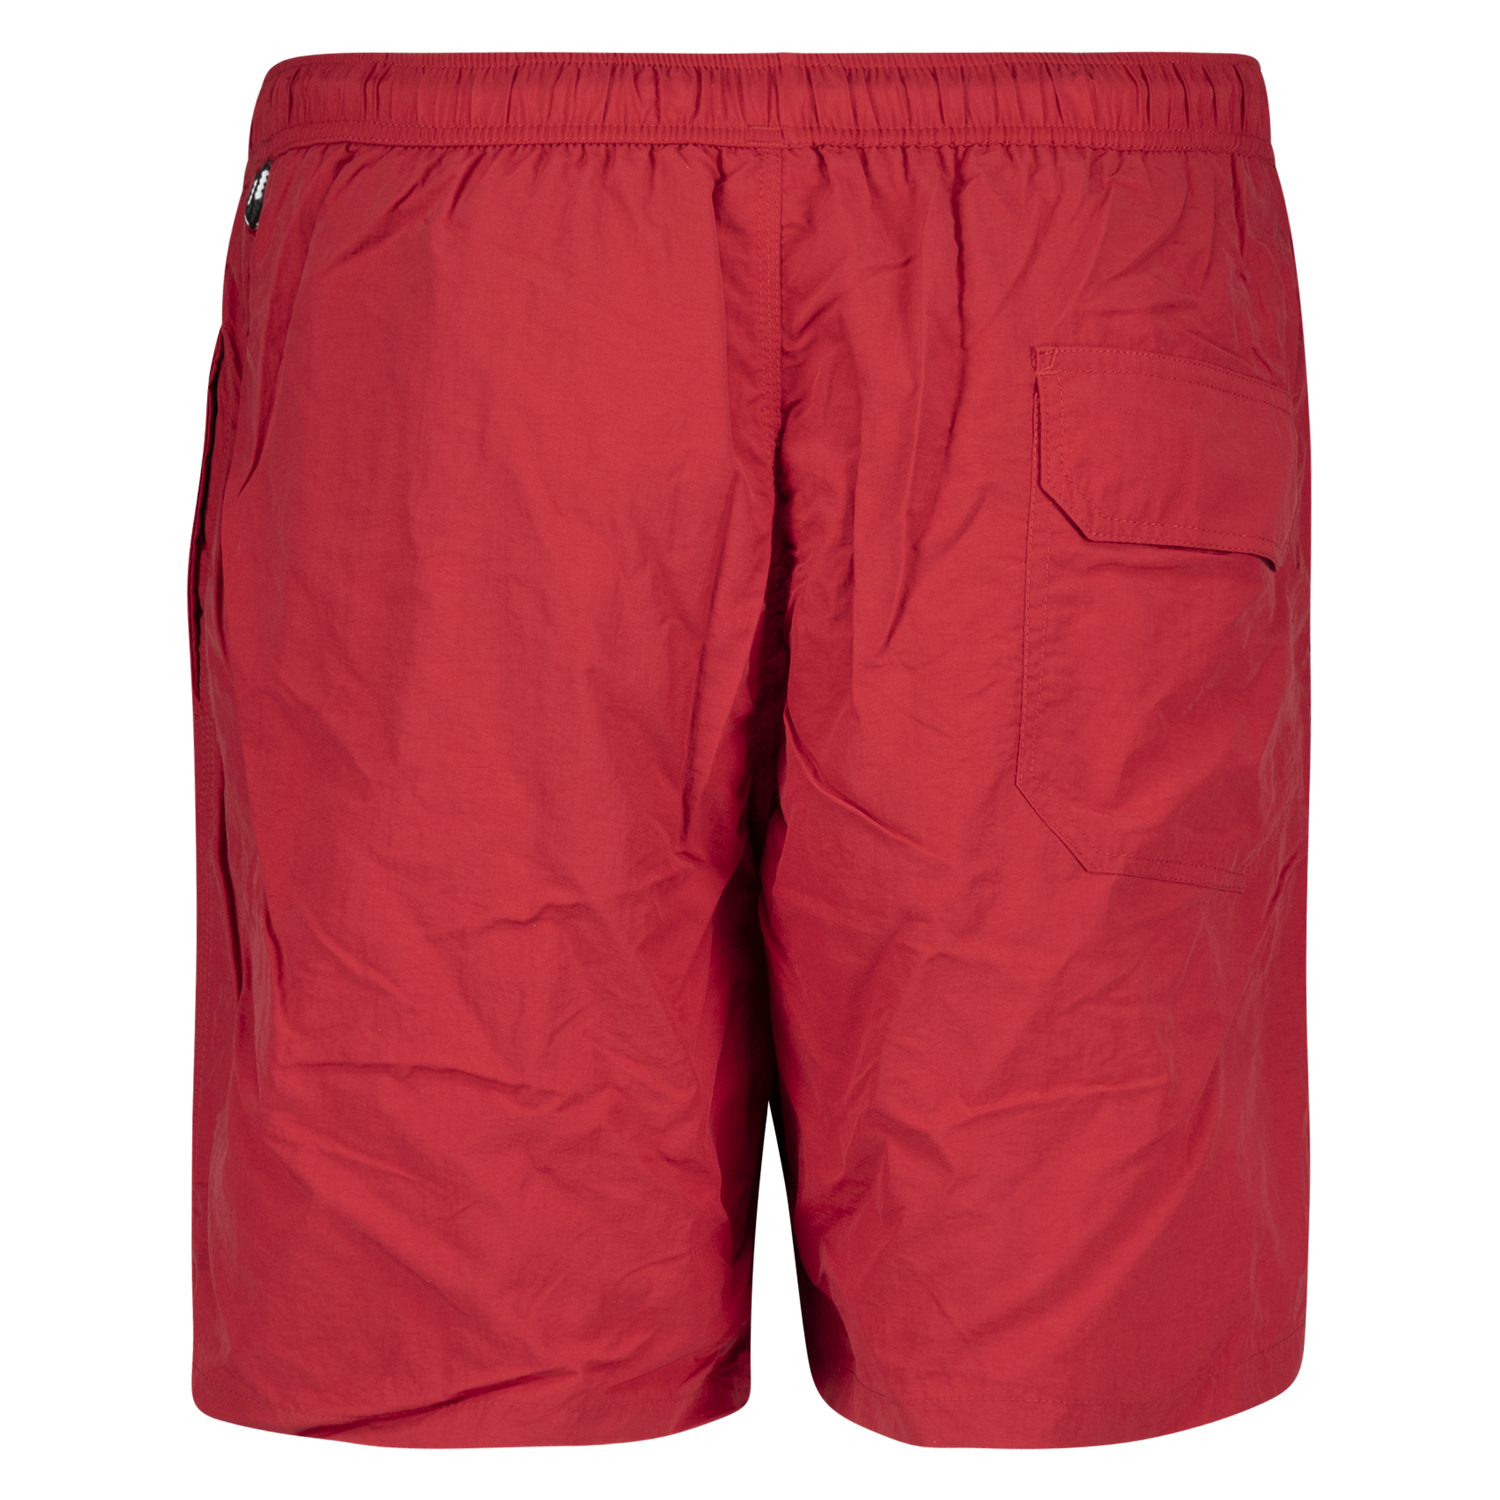 Red swimming trunks by aero/North 56°4 in extra large sizes up to 8XL